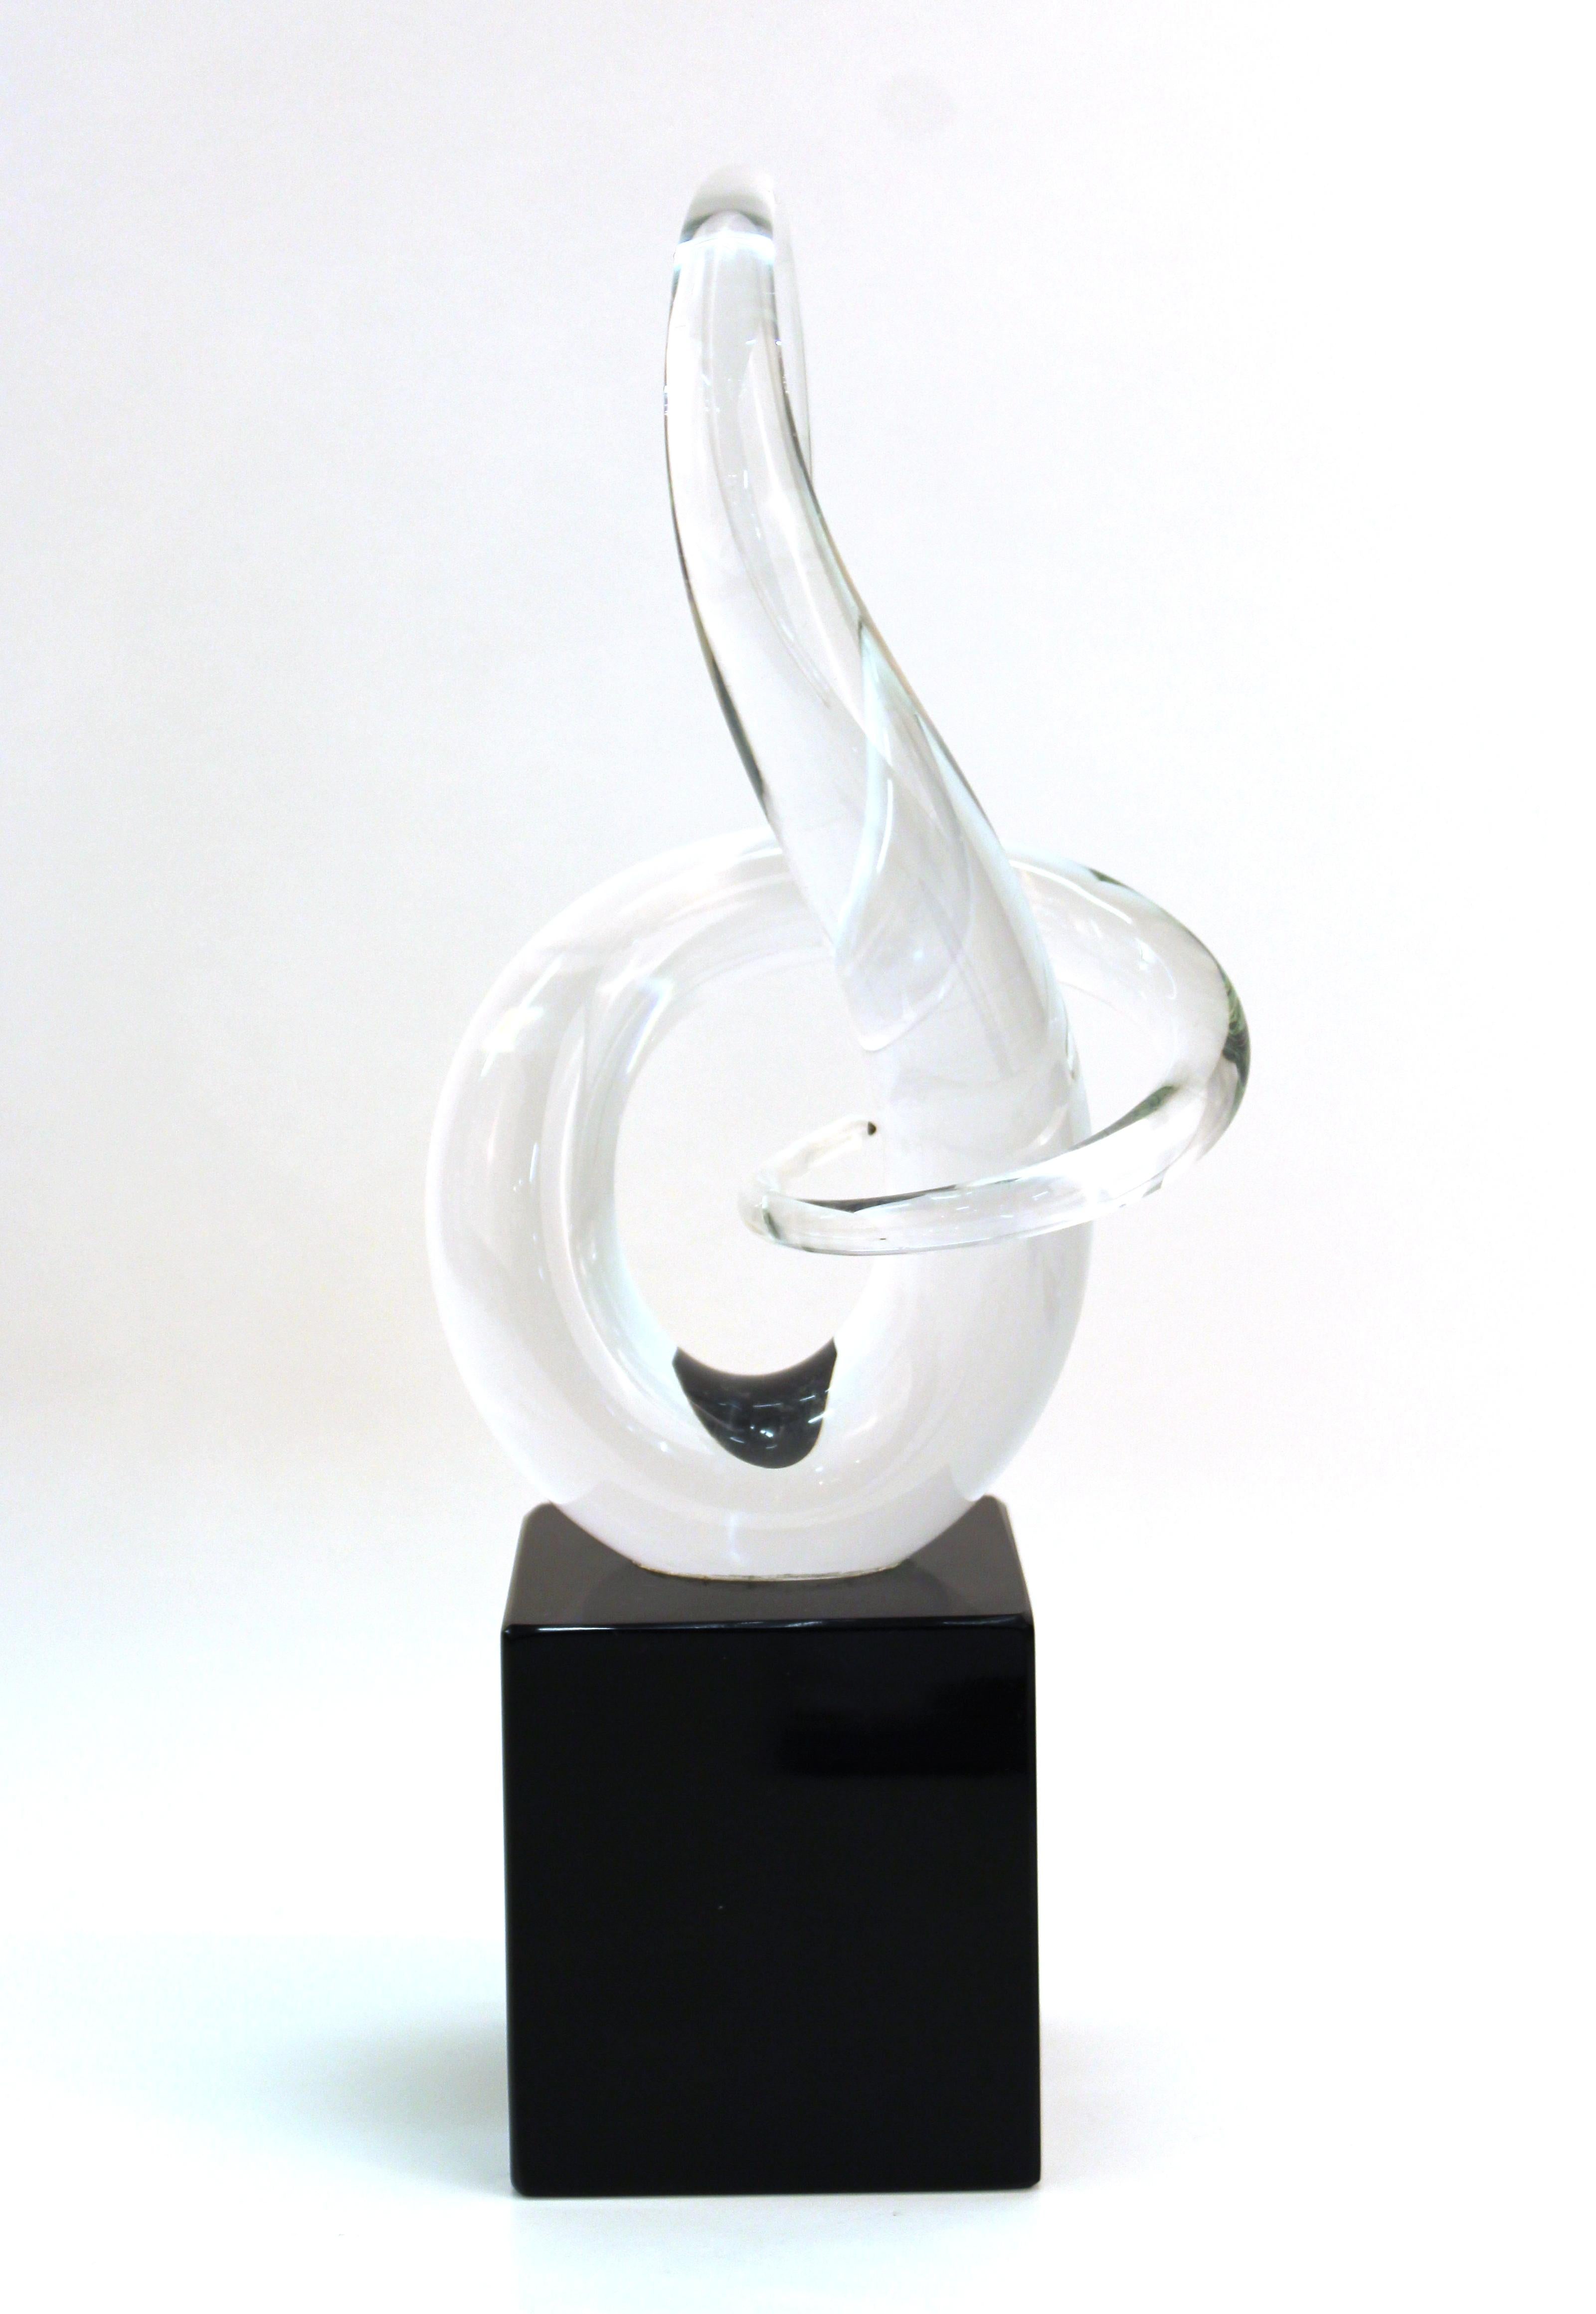 Late 20th Century Italian Modern Abstract Art Glass Sculpture Signed Auotra